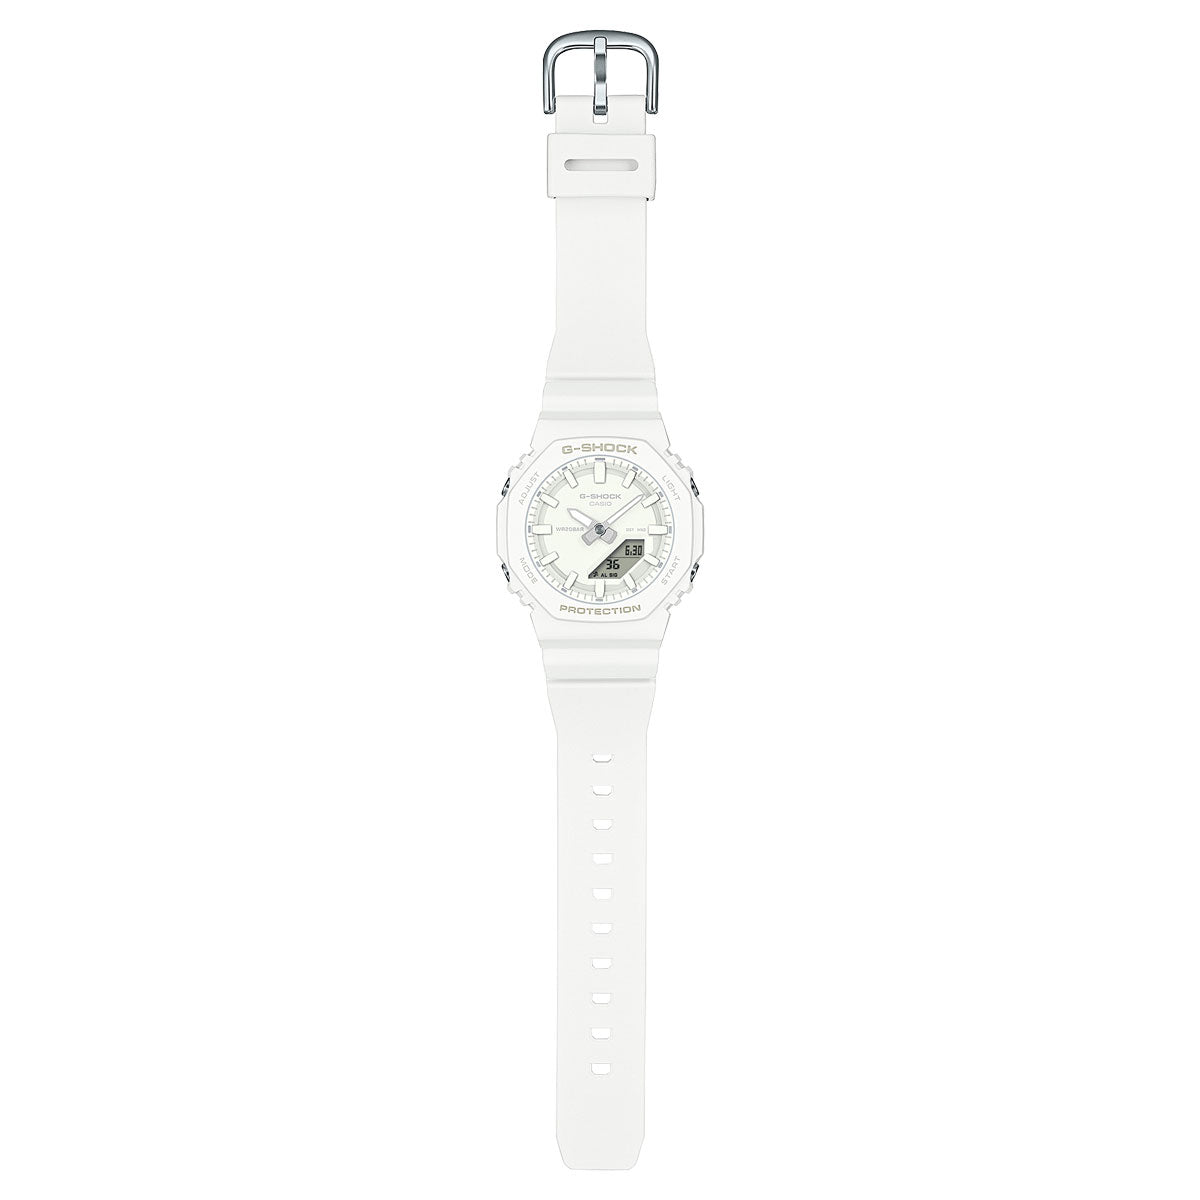 G-Shock GMAP2100-7A Watch - Resin White image 2